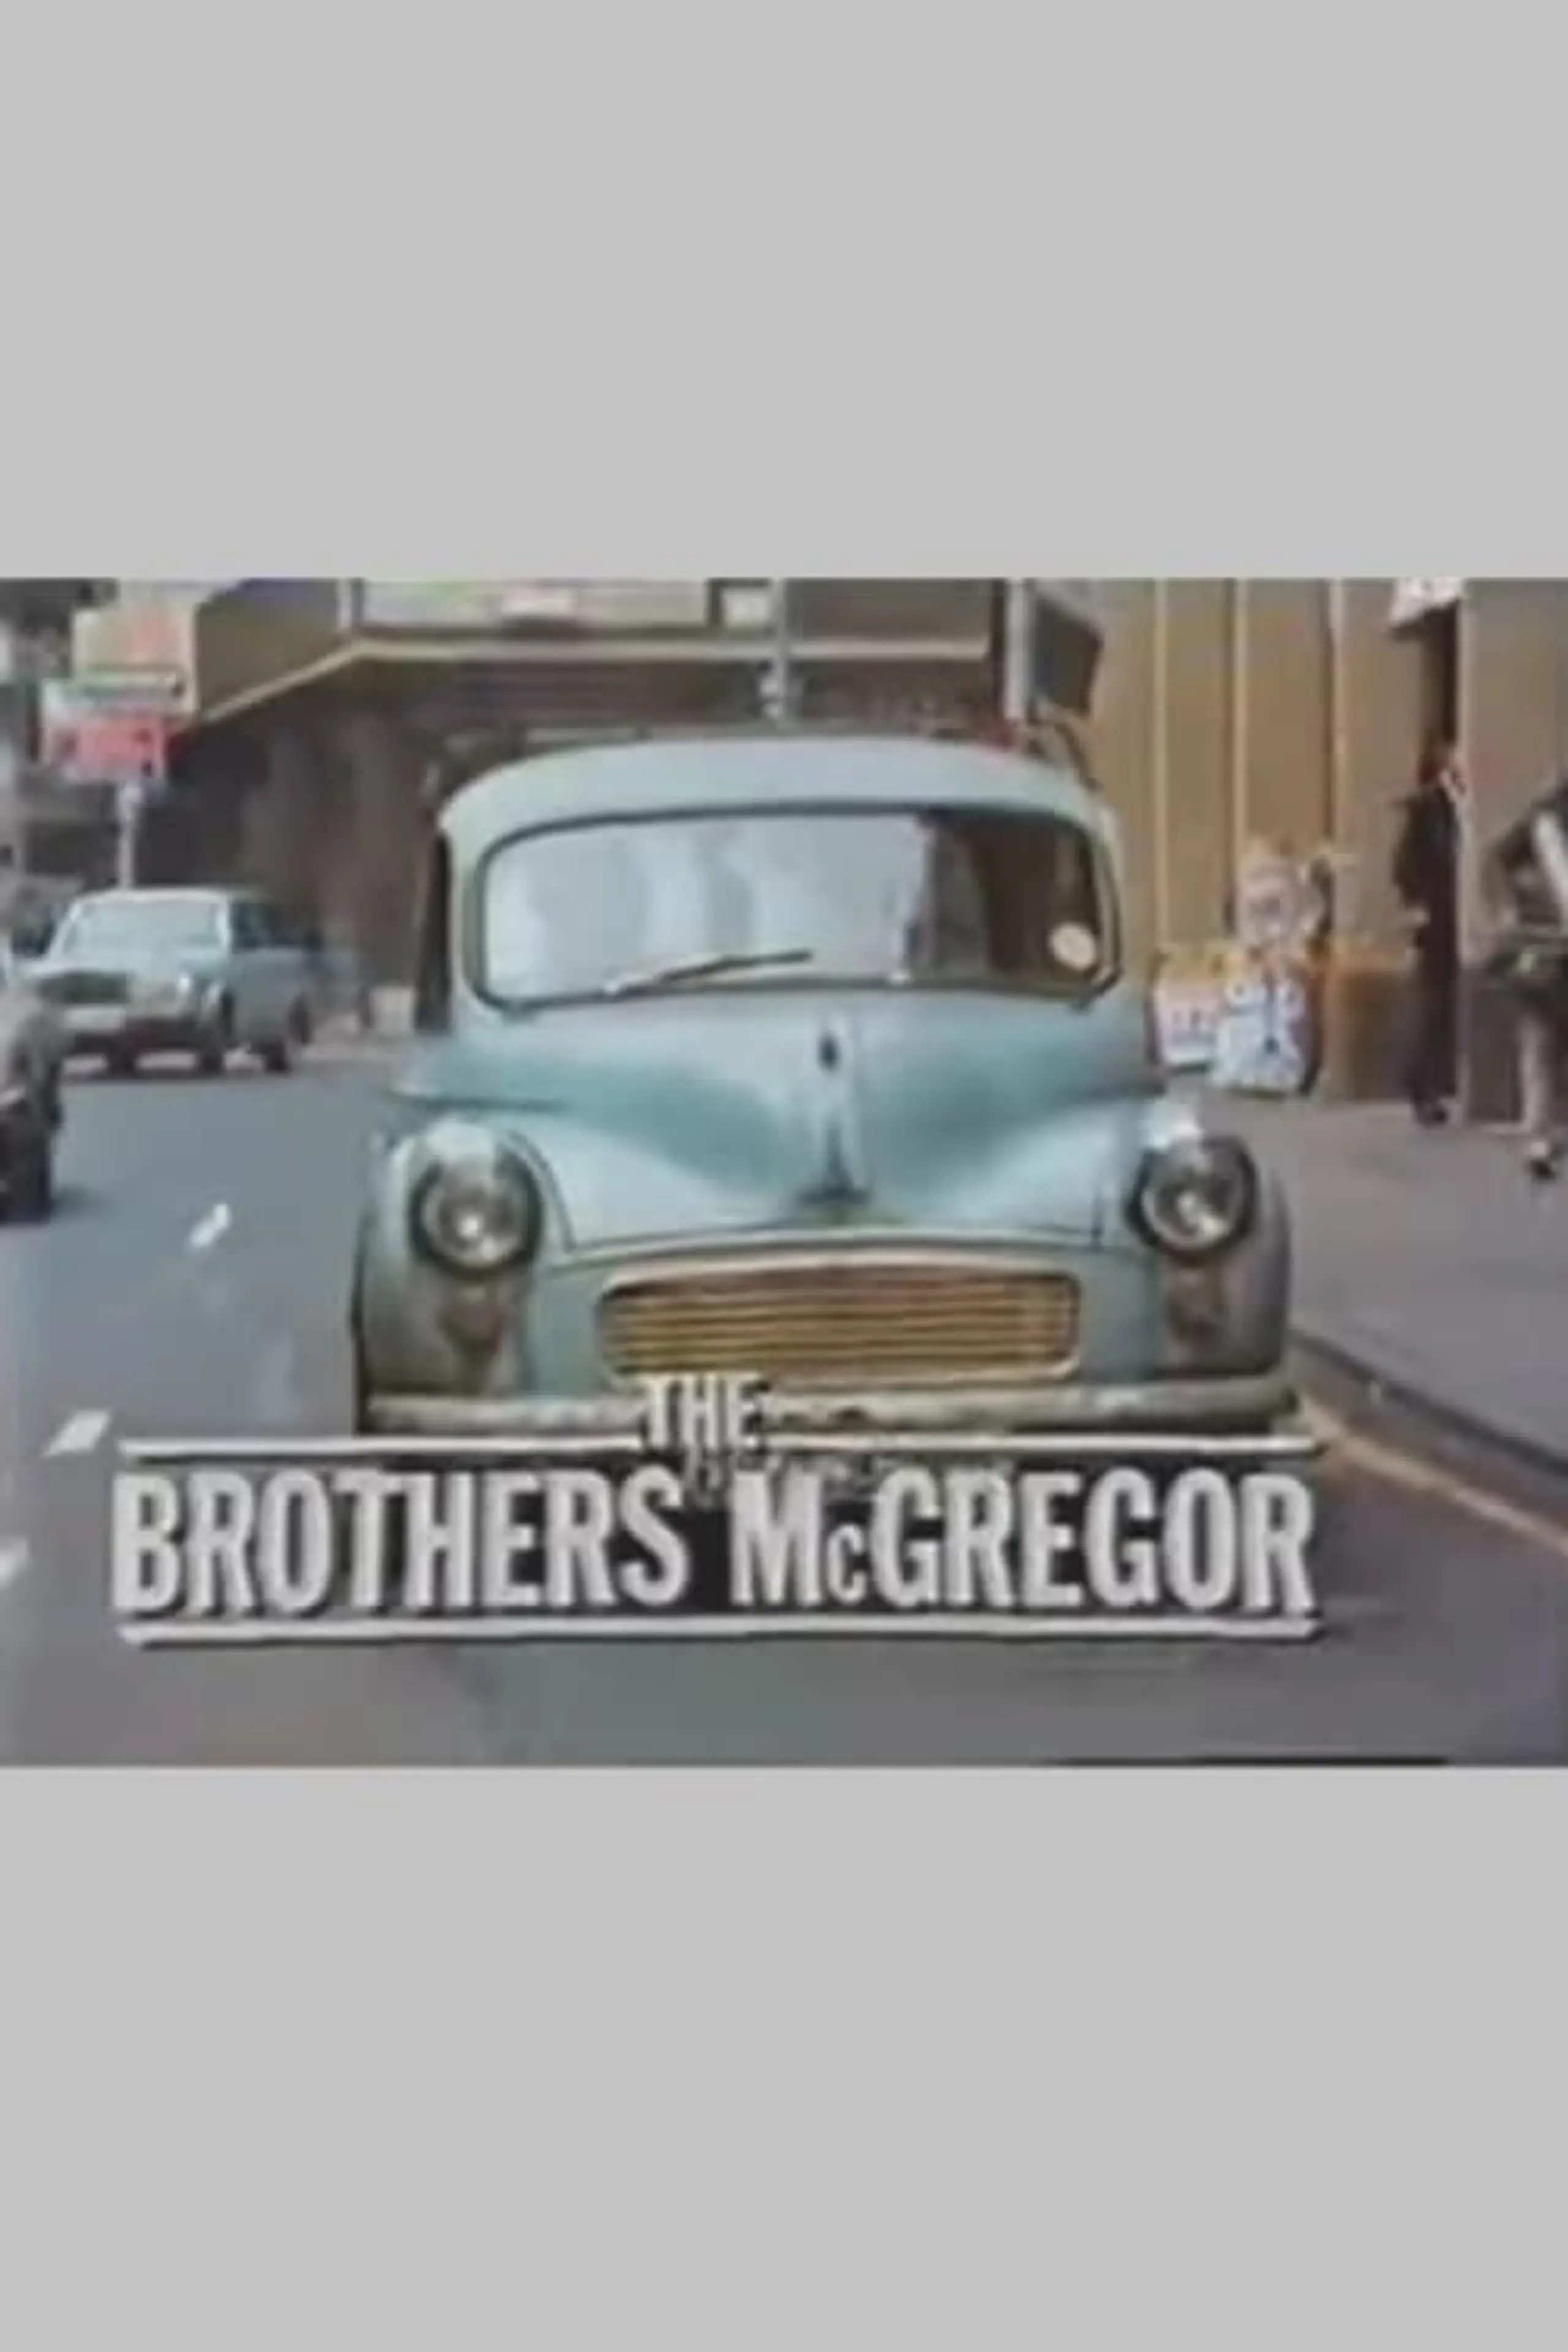 The Brothers McGregor